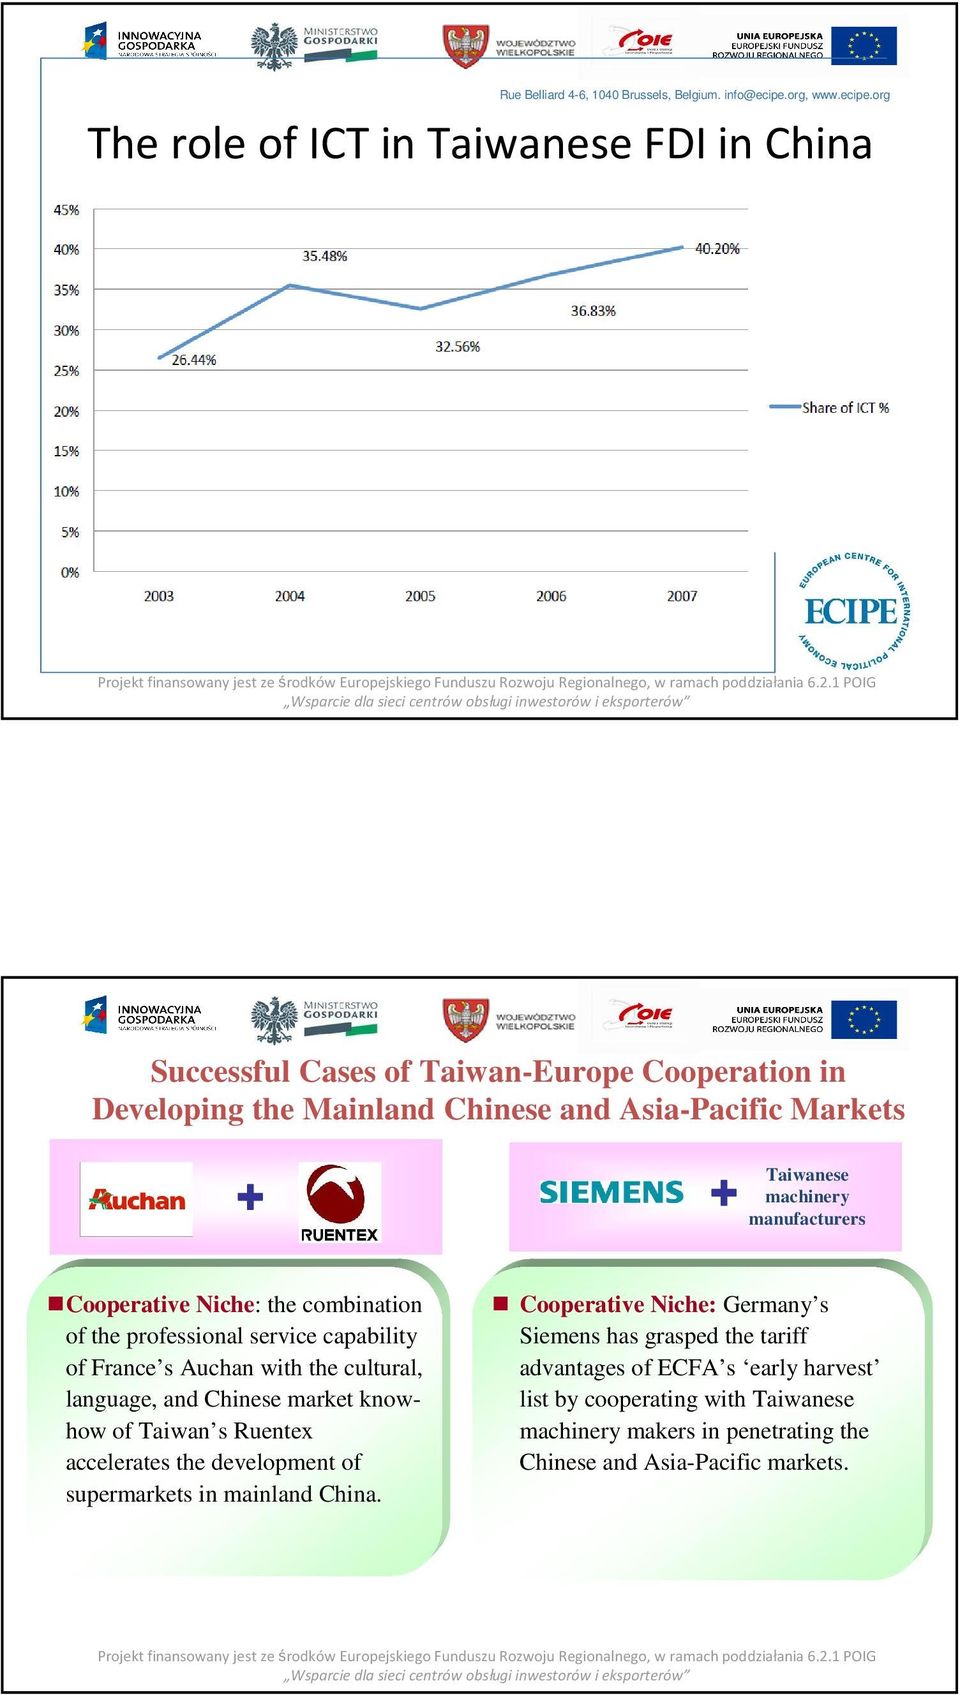 org The role of ICT in Taiwanese FDI in China Successful Cases of Taiwan-Europe Cooperation in Developing the Mainland Chinese and Asia-Pacific Markets Taiwanese machinery